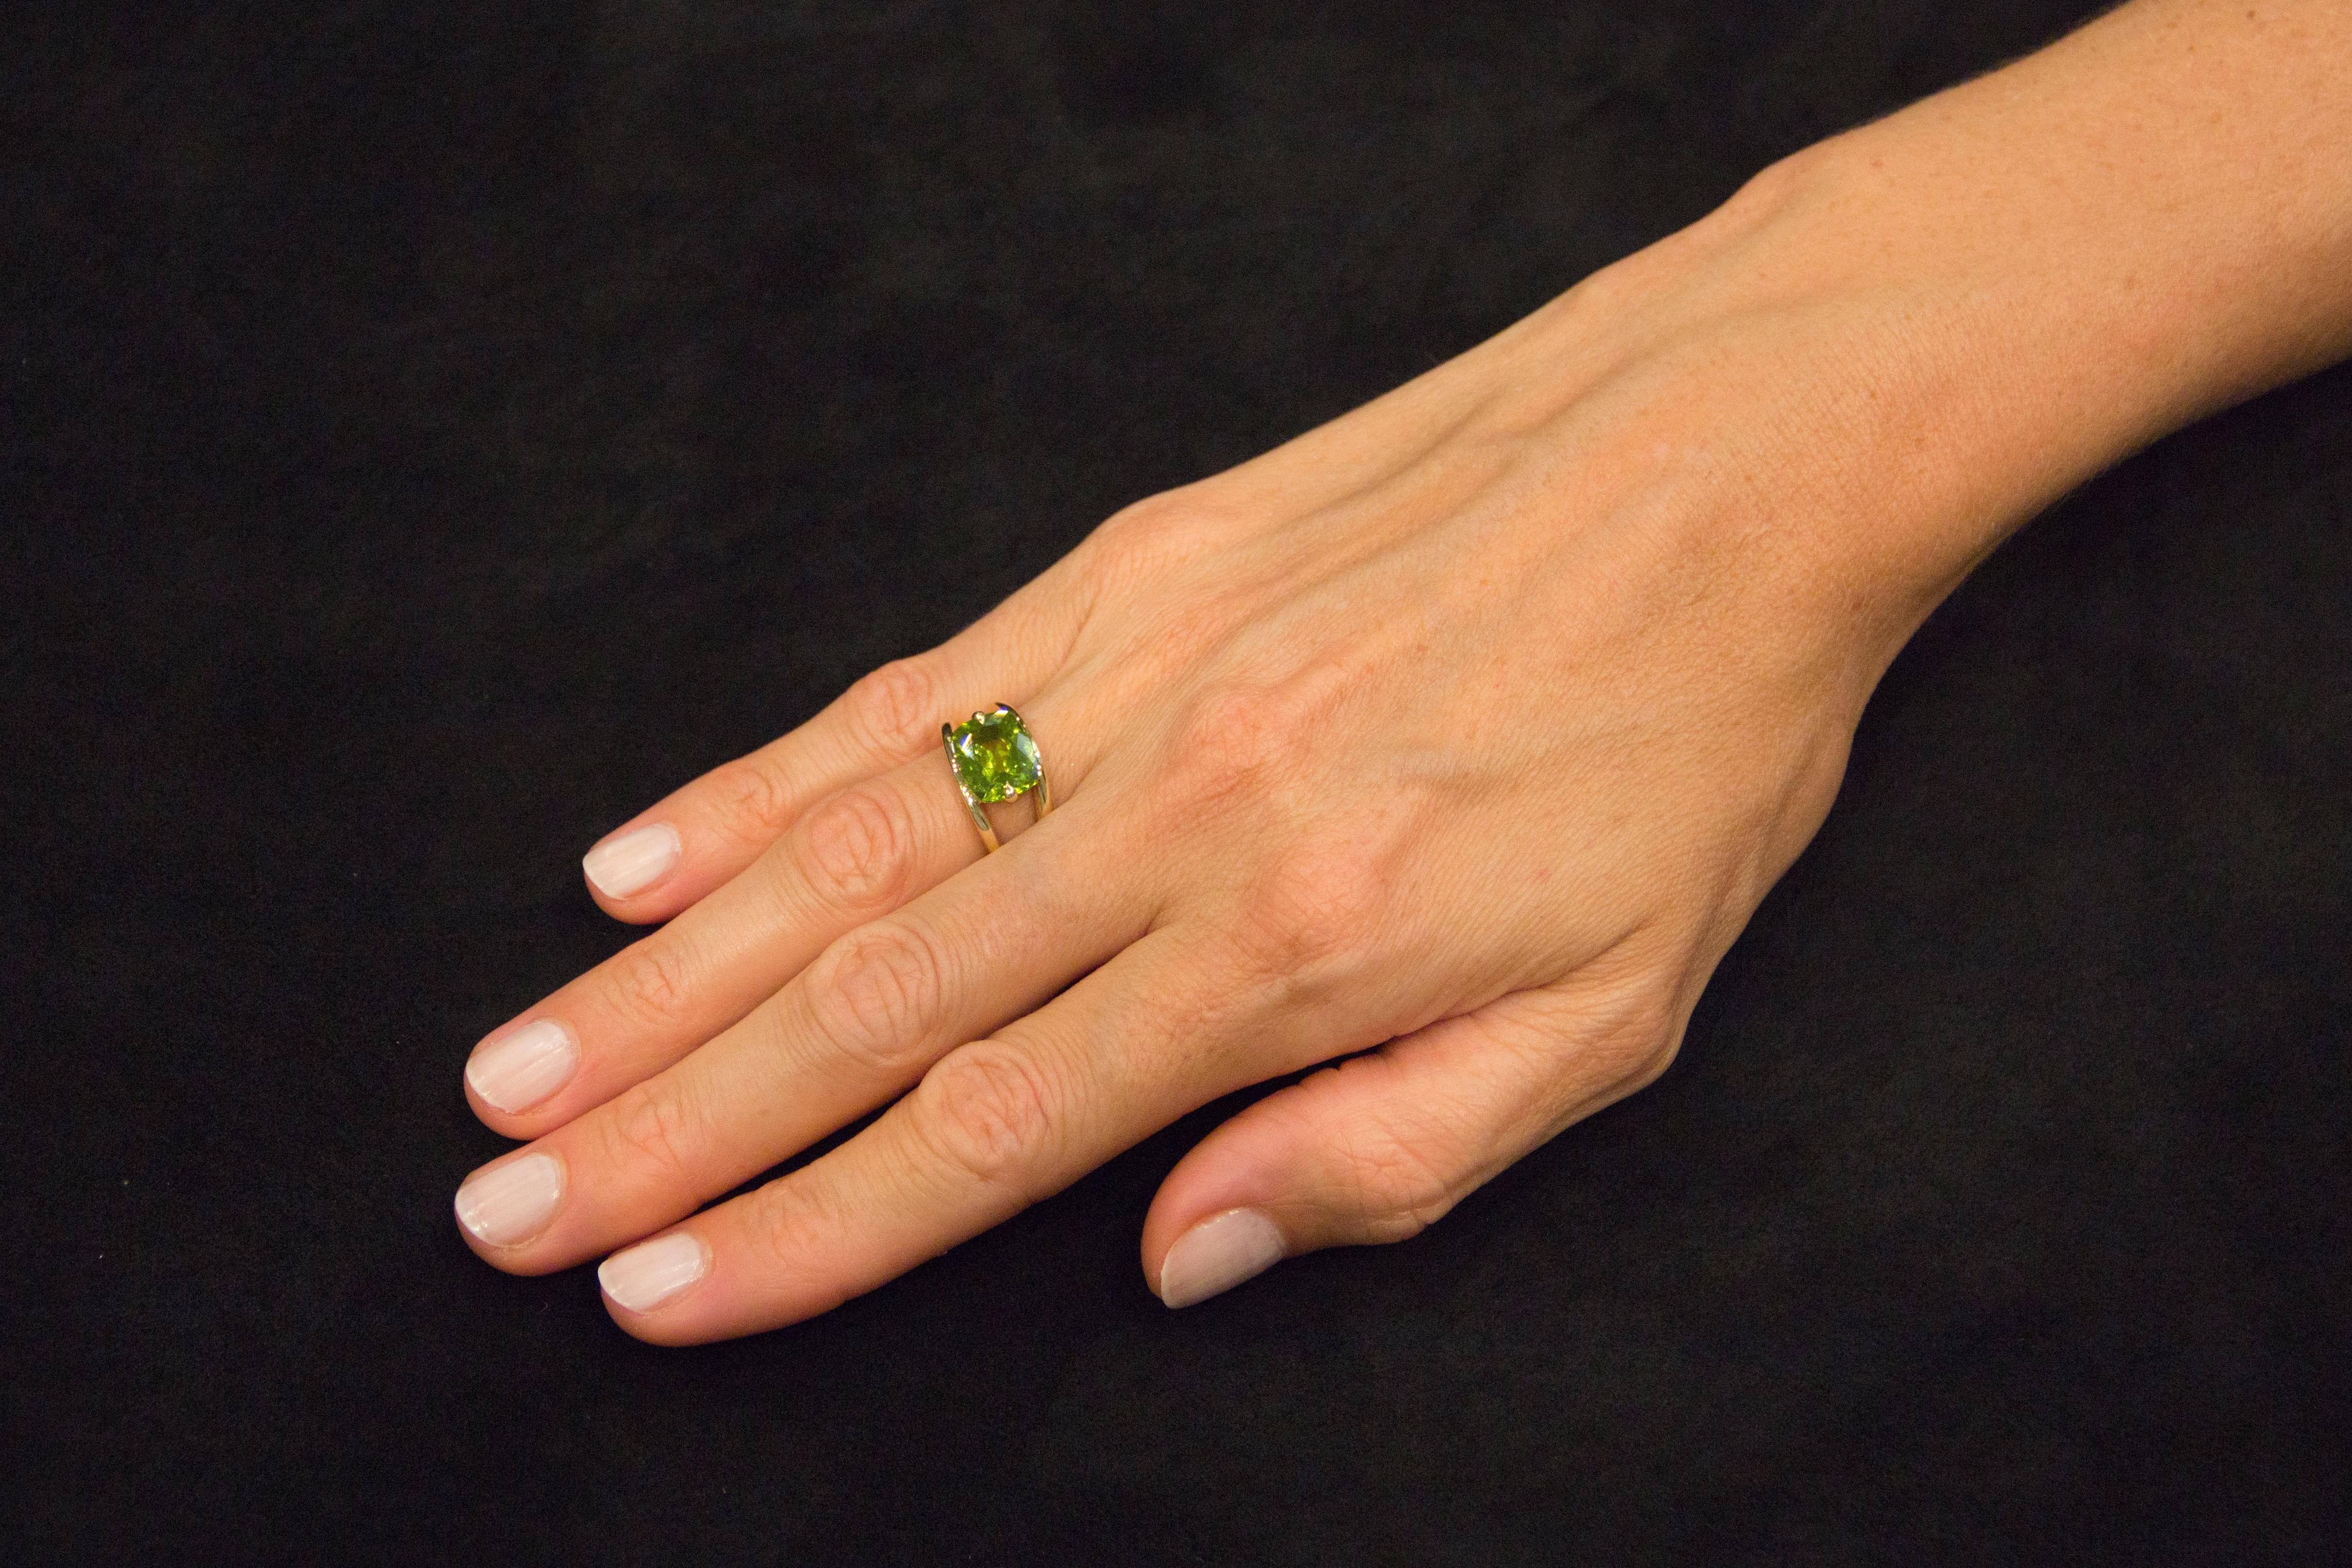 Jona design collection, hand crafted in Italy, 18 karat yellow gold ring set with a cushion cut Peridot weighing 3.95 carats 
Dimension : H 0.96 in x W 0.85 in x D 0.41 in - H 24.63 mm x W 21.75 mm X D 10.68 mm.
All Jona jewelry is new and has never